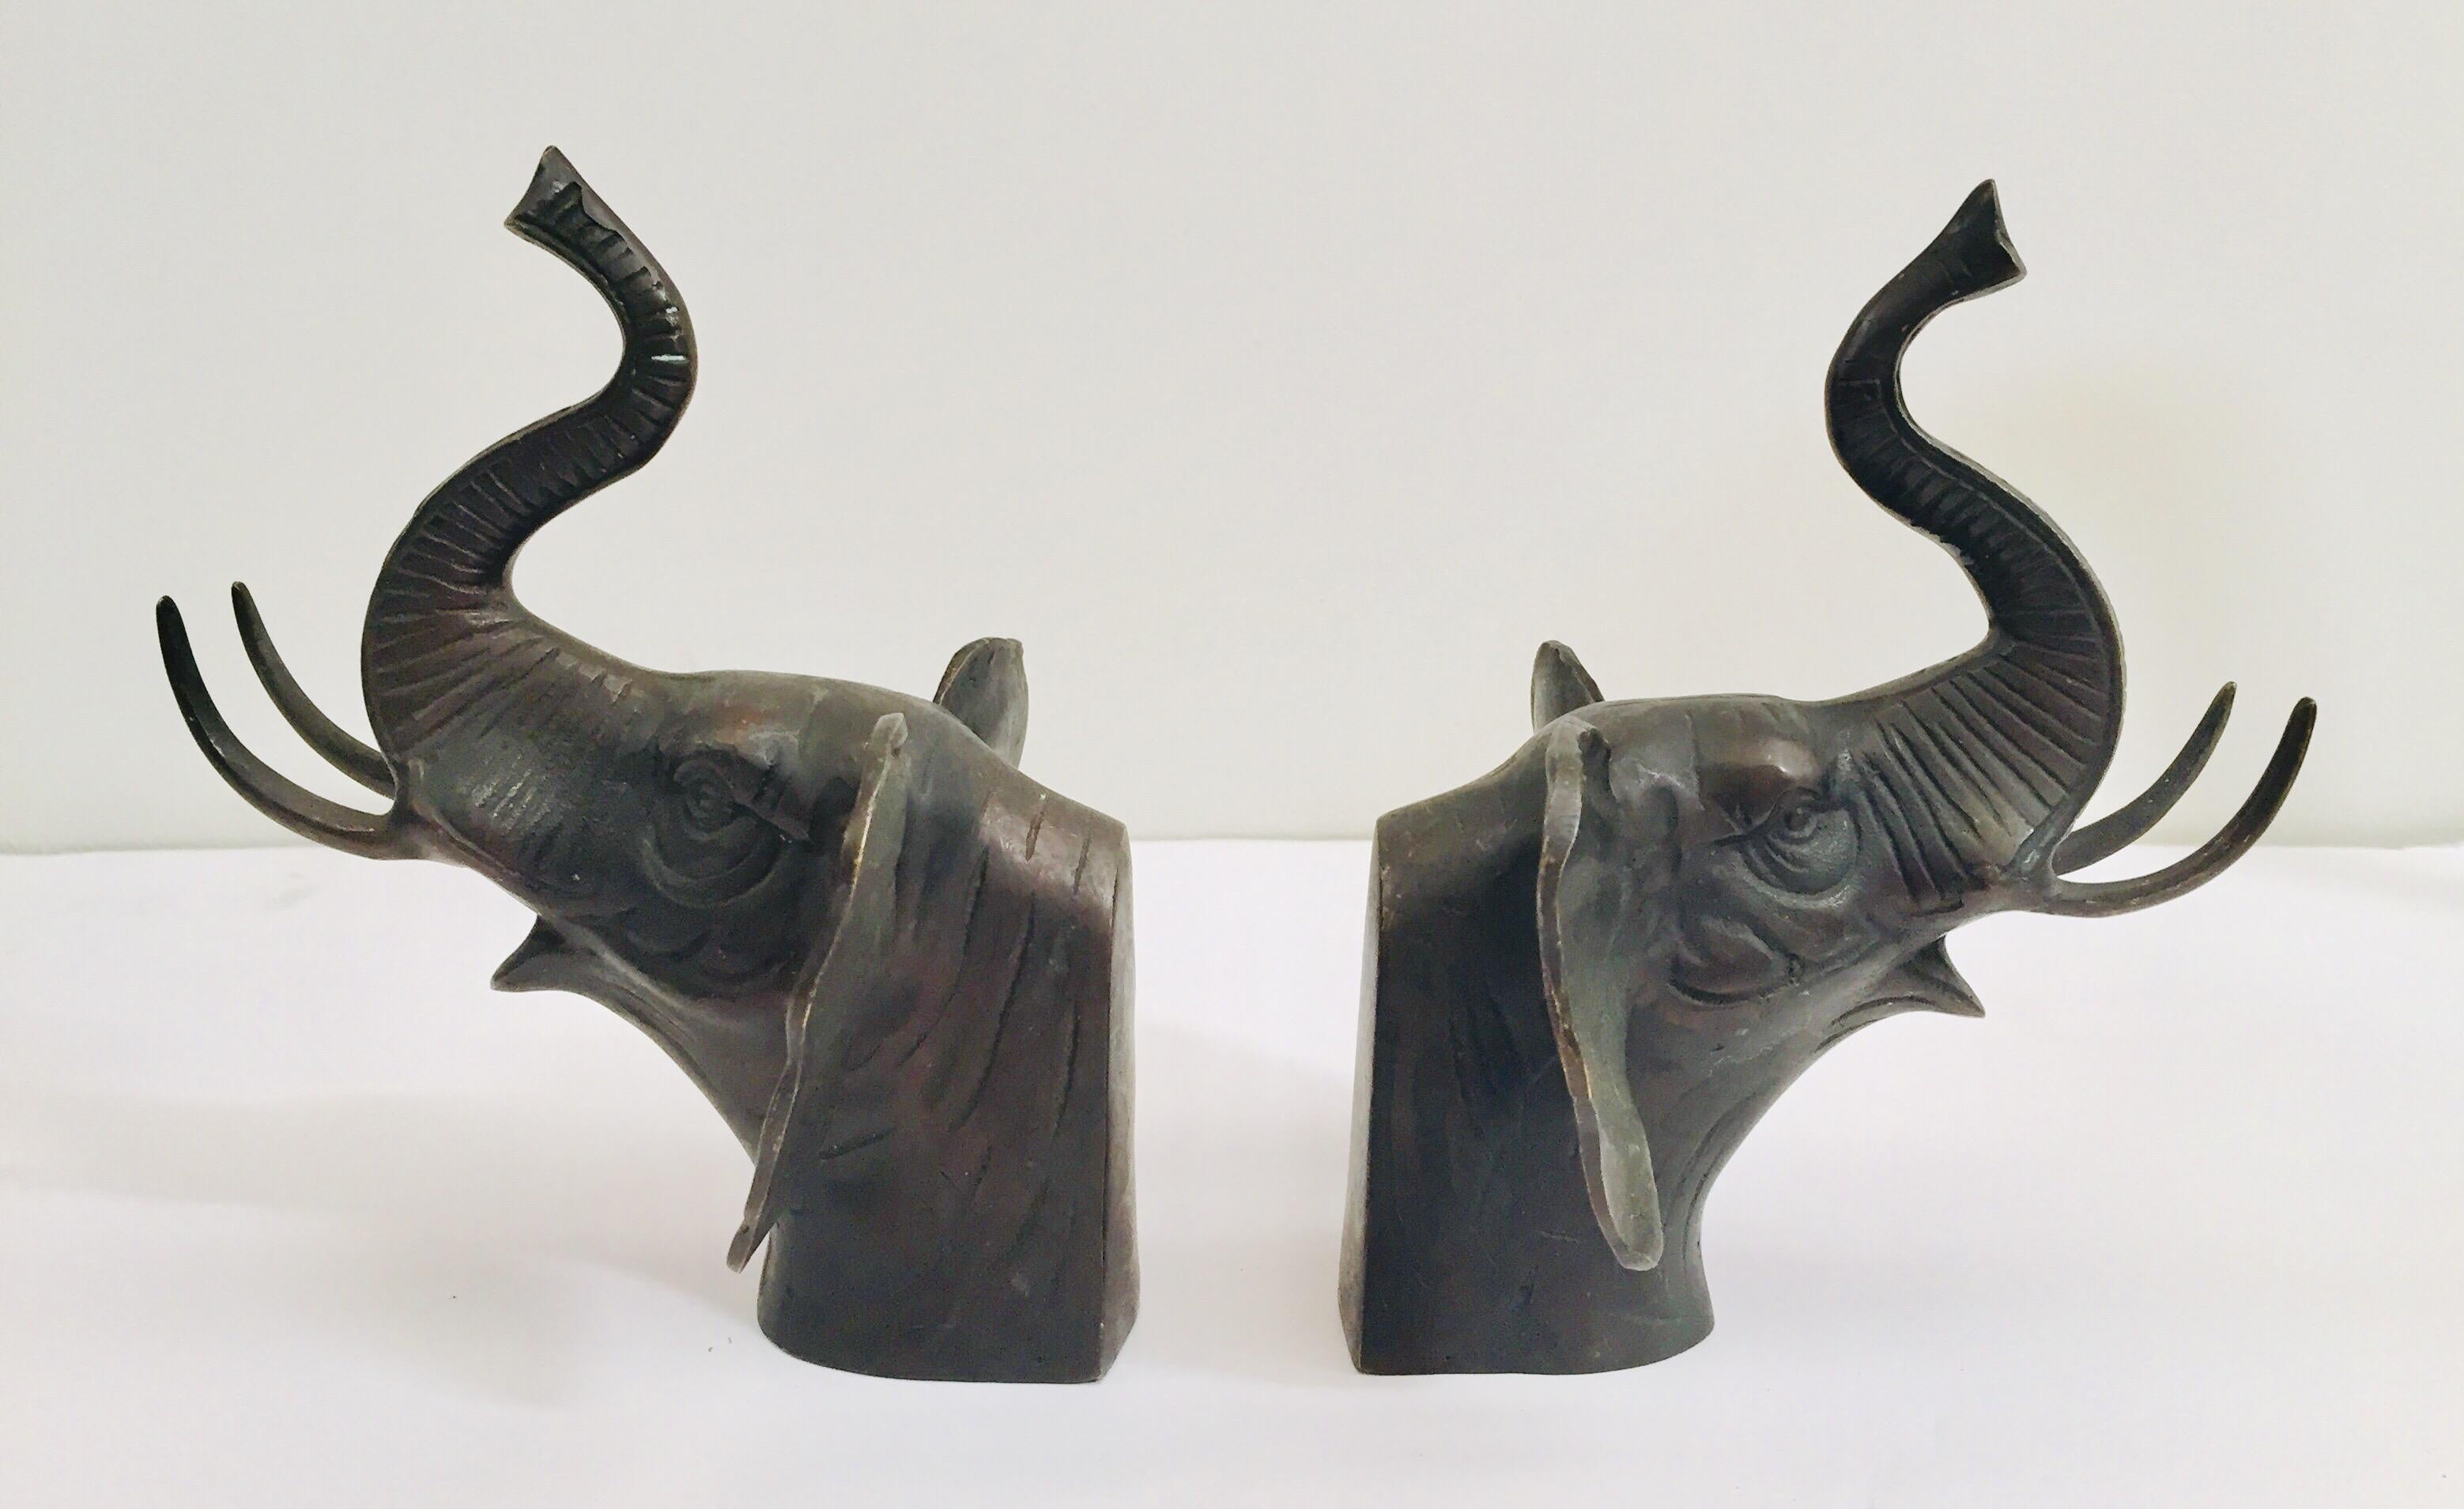 Cast iron elephant heads bookends.
Elephant heads in dark bronze patinated color, nice quality and details sculpture.
Great to use as bookends, paperweights, or decorative elephant sculptures around the house.
Elephant heads in cast metal bronze